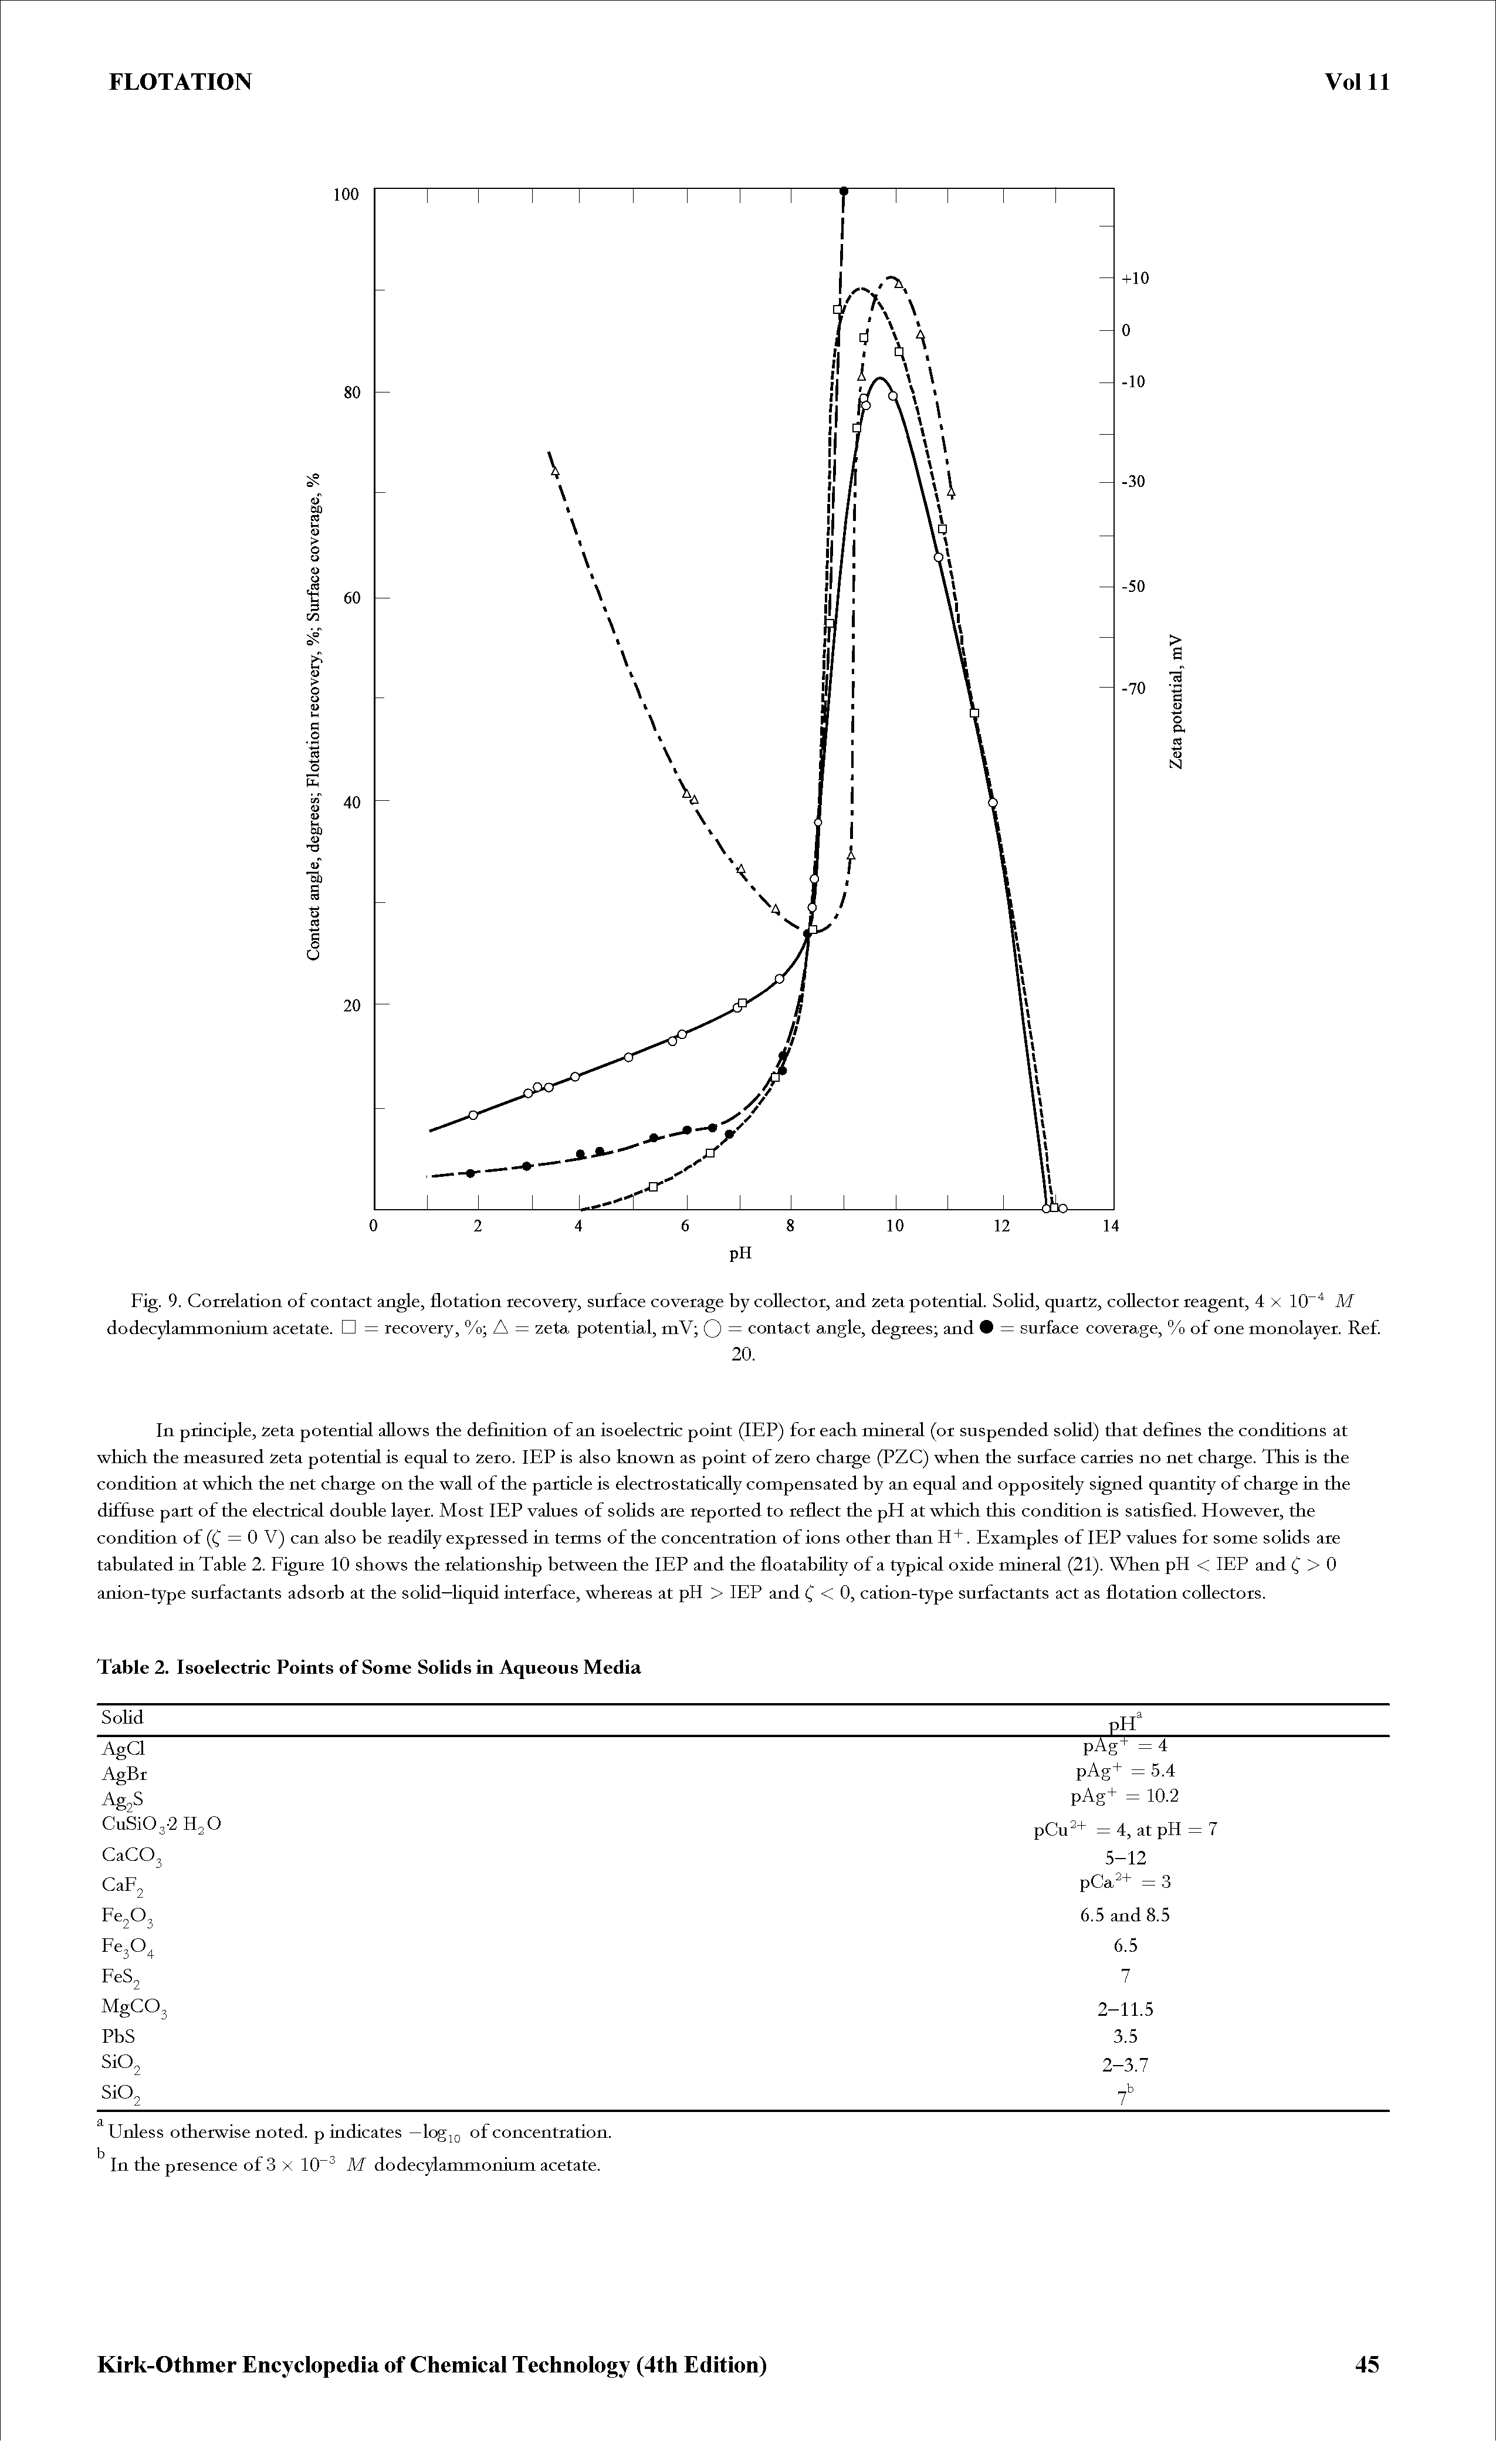 Fig. 9. Correlation of contact angle, flotation recovery, surface coverage by collector, and 2eta potential. Solid, quart2, collector reagent, 4 x 10 Af dodecylammonium acetate. = recovery, % A = zeta potential, mV Q — contact angle, degrees and = surface coverage, % of one monolayer. Ref.